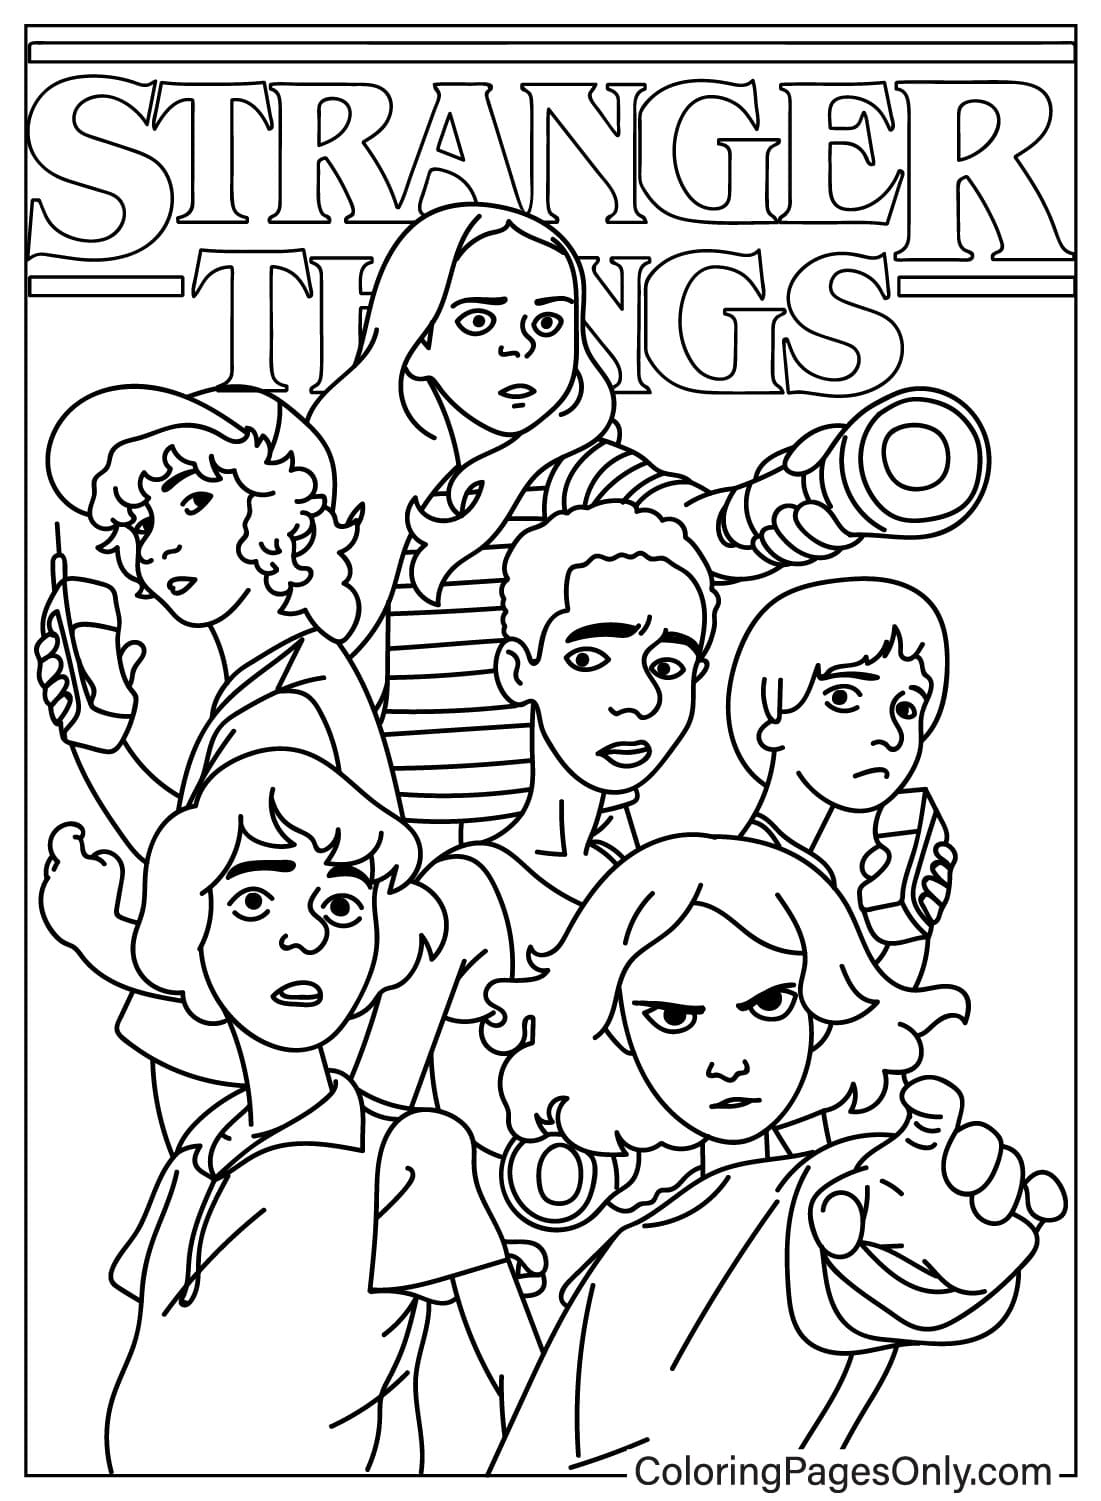 Stranger Things Free Coloring Page from Stranger Things